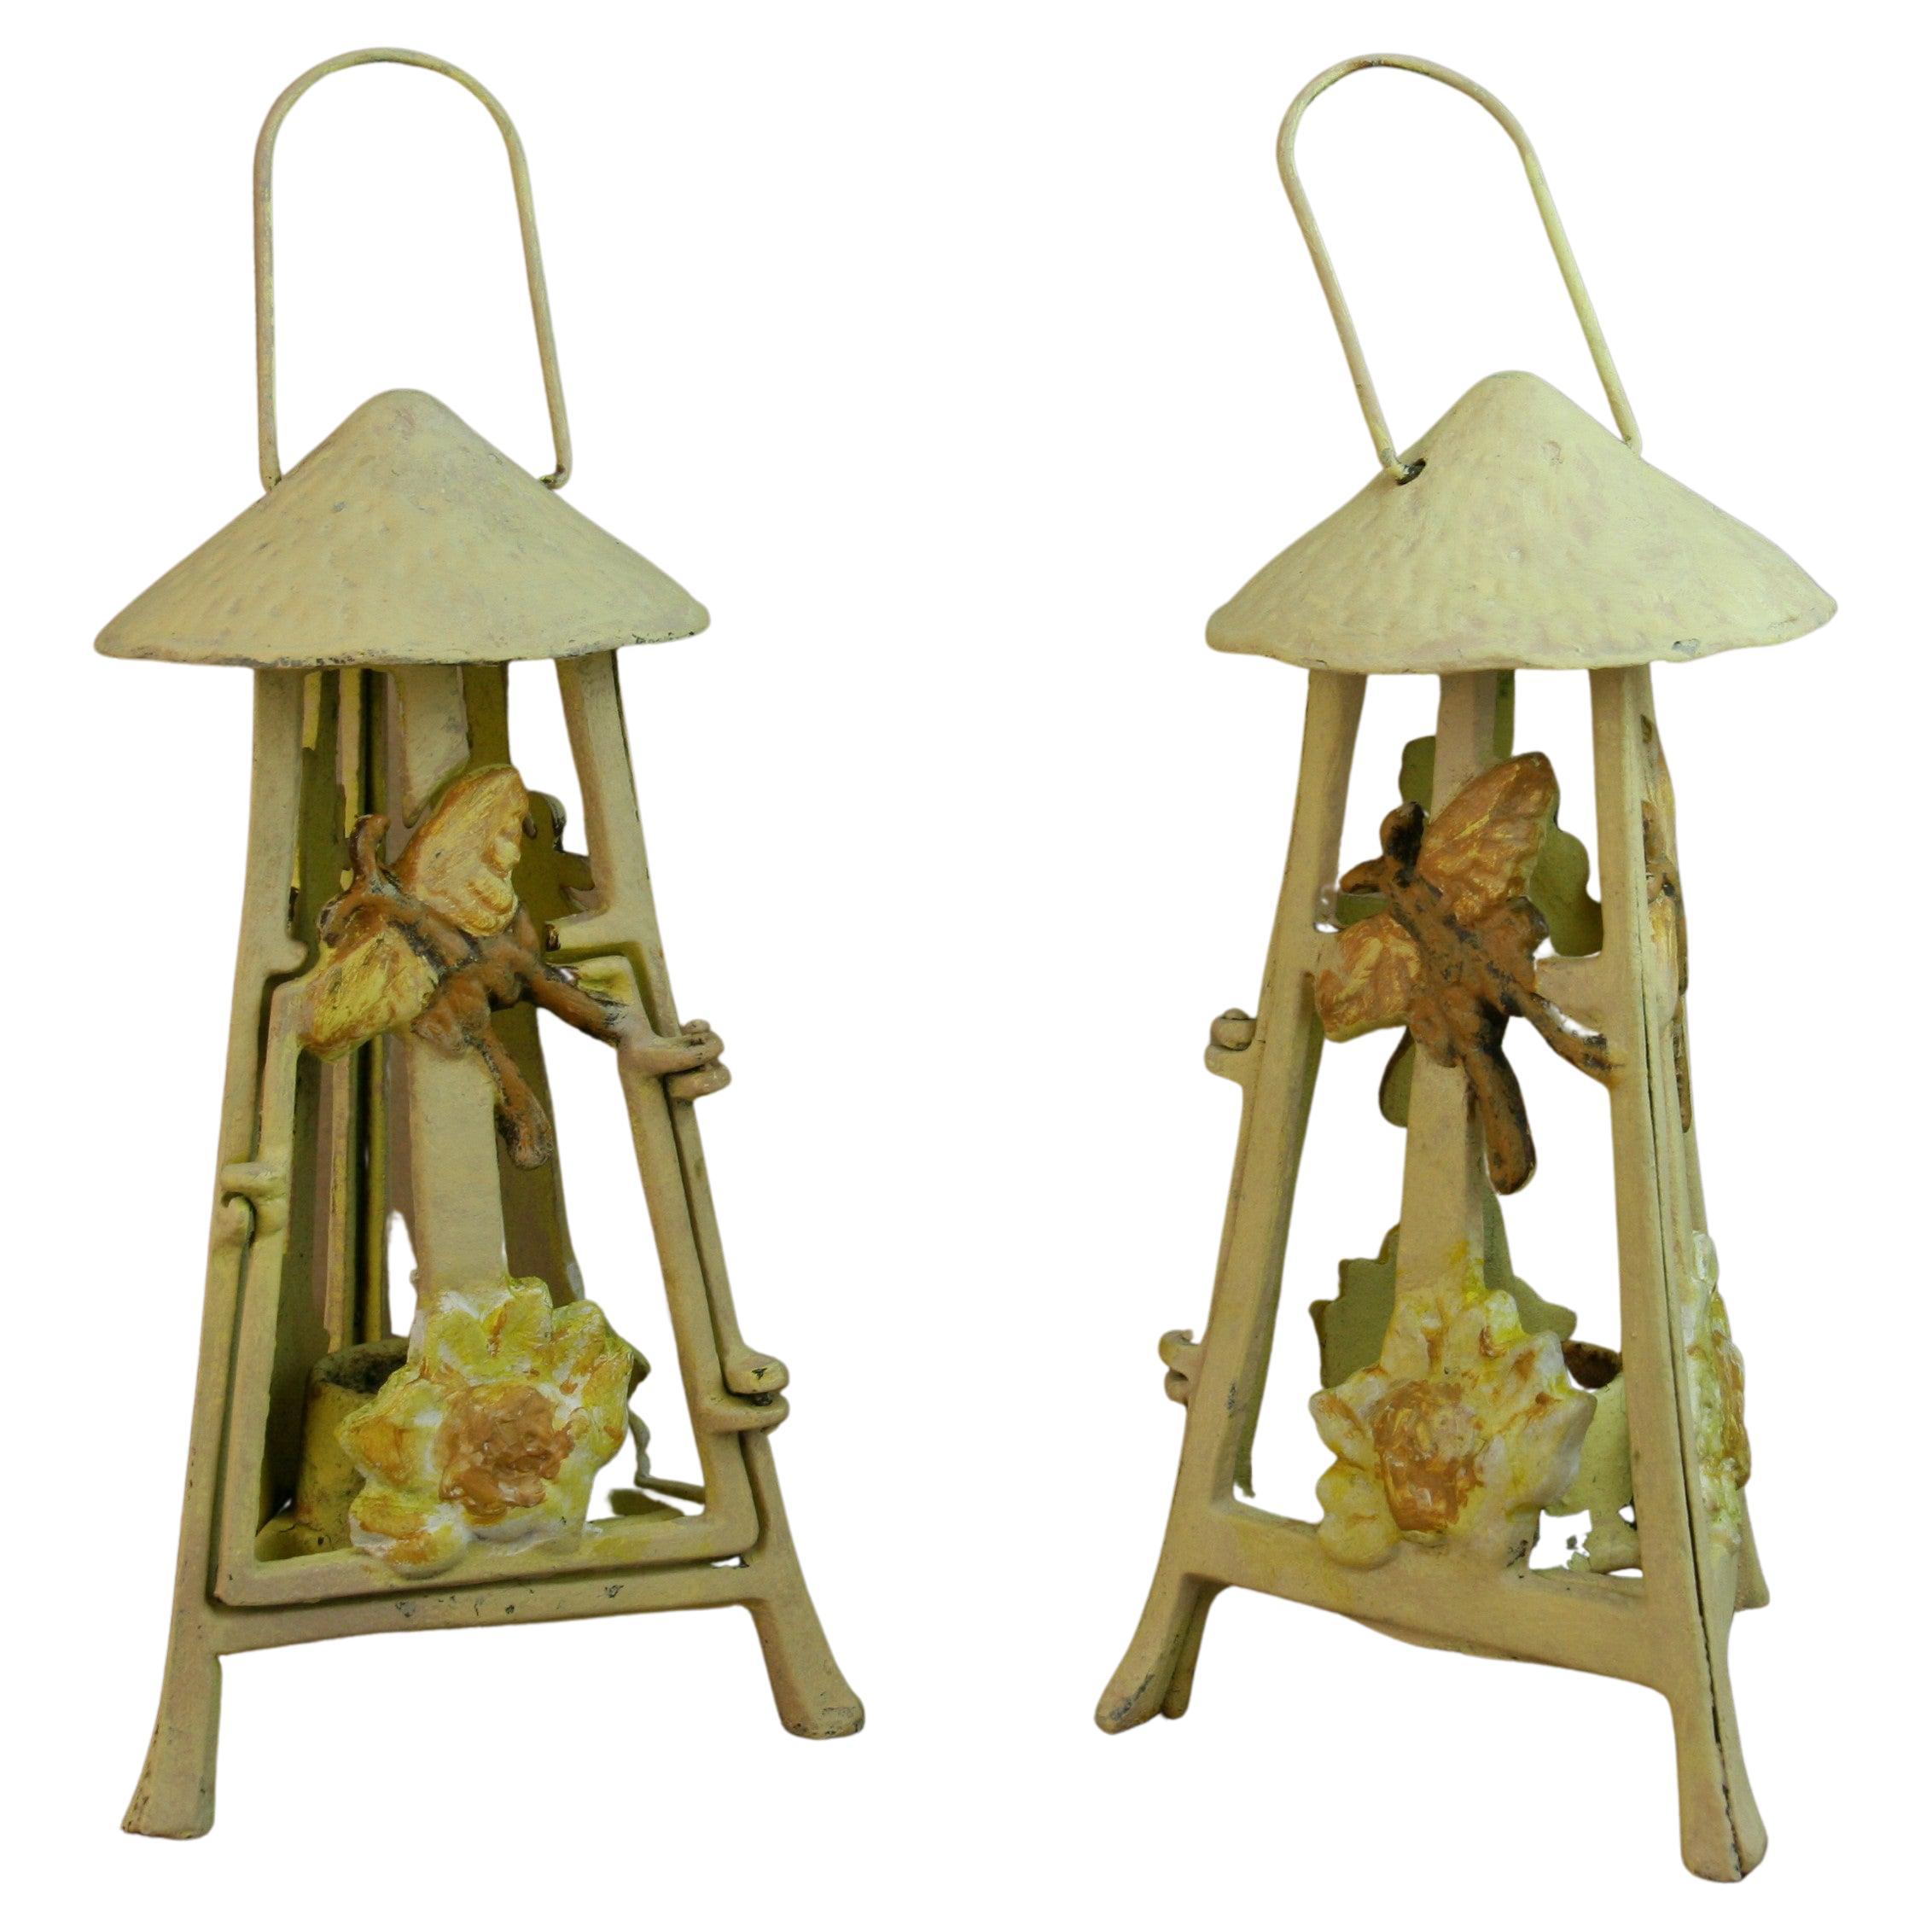 3-981 Pair Japanese butterfly and flowers garden candle lanterns.
Can be purchased individually for $300 each